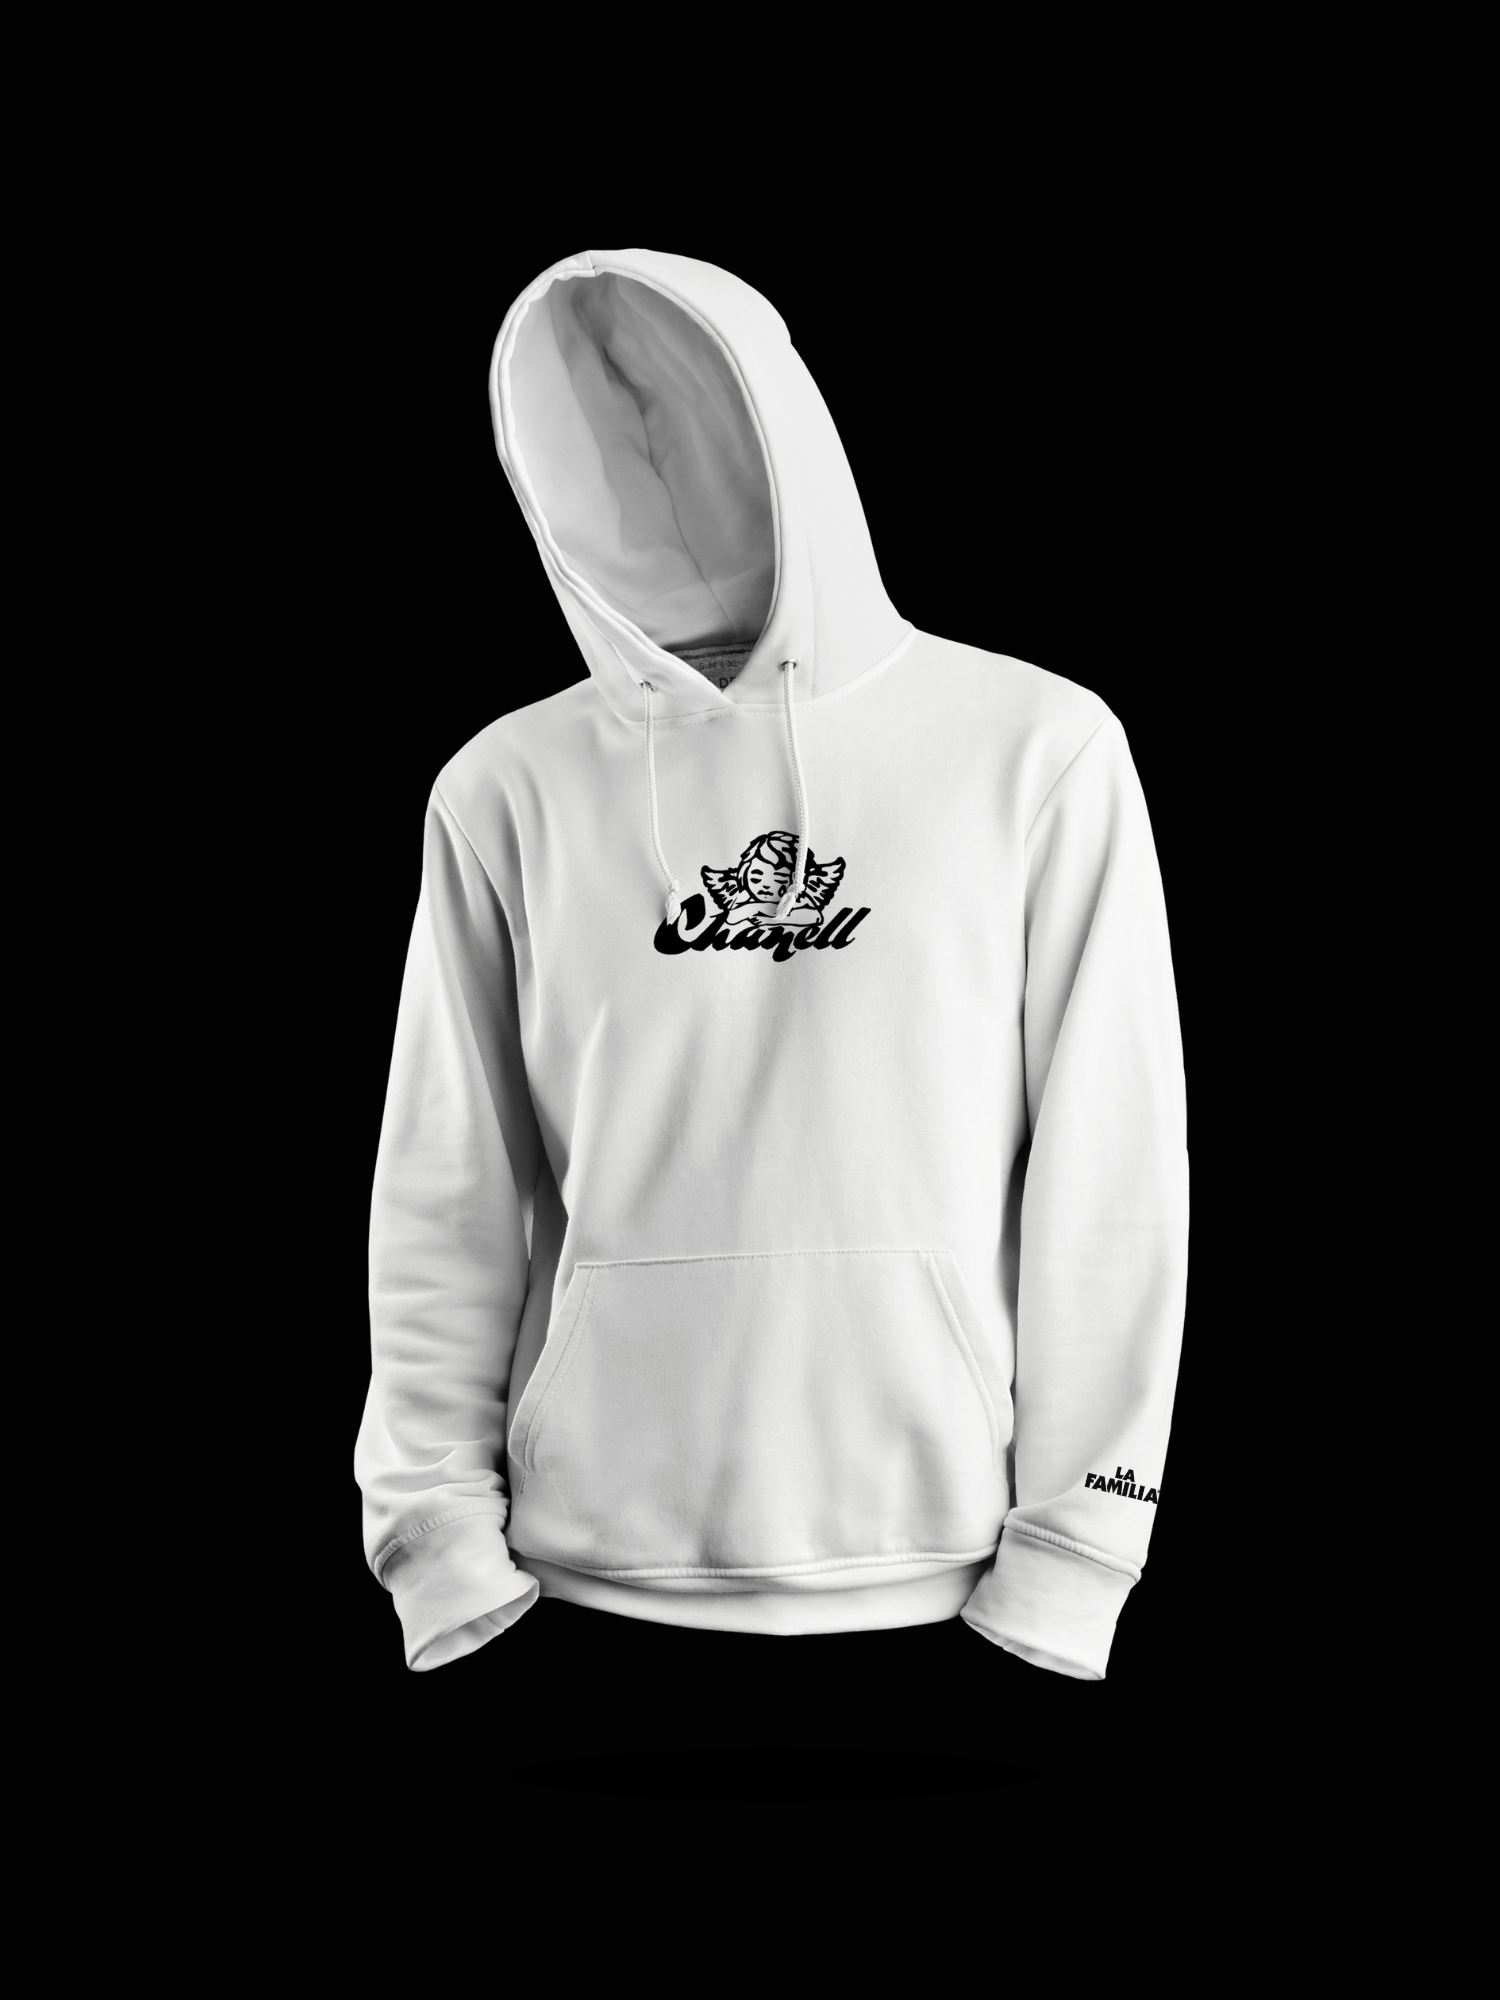 Chanell Hoodie White